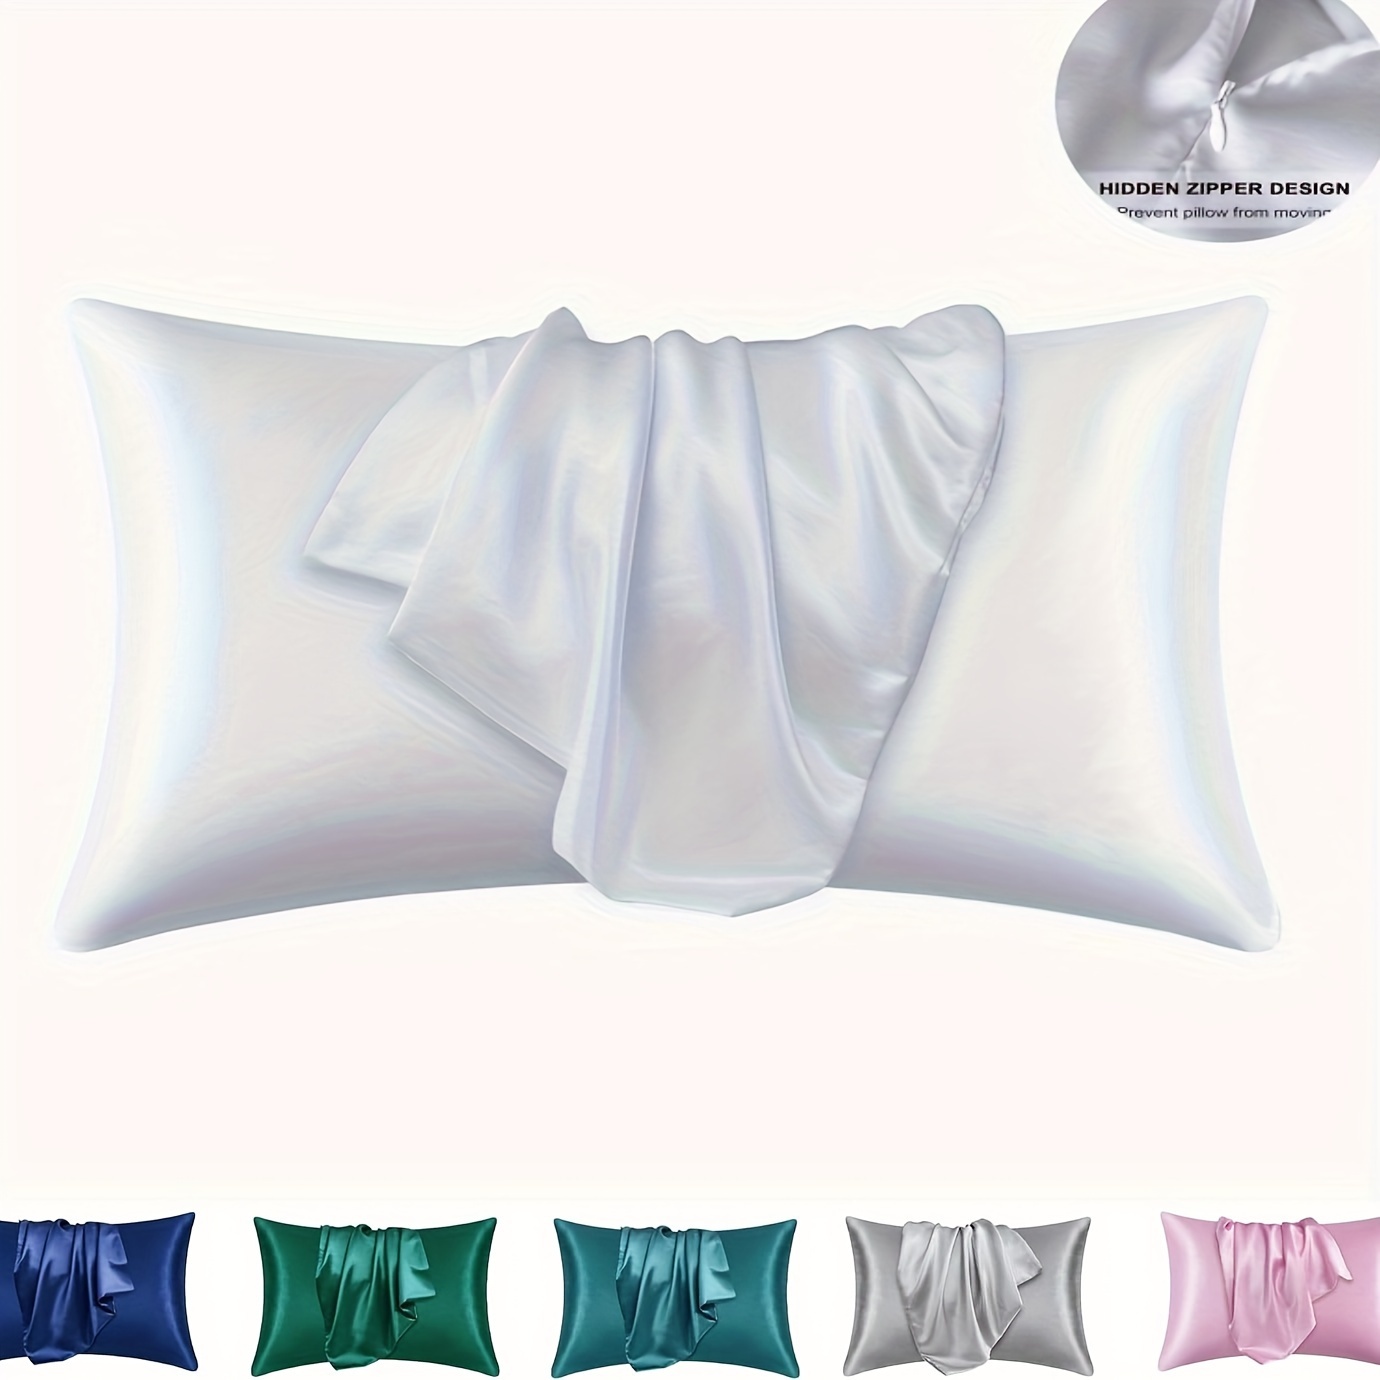 

2pcs/set Satin Silky Pillowcase - Hair And Skin Friendly, Gray Color For Bedroom And Dorm Room - No Pillow Insert Needed